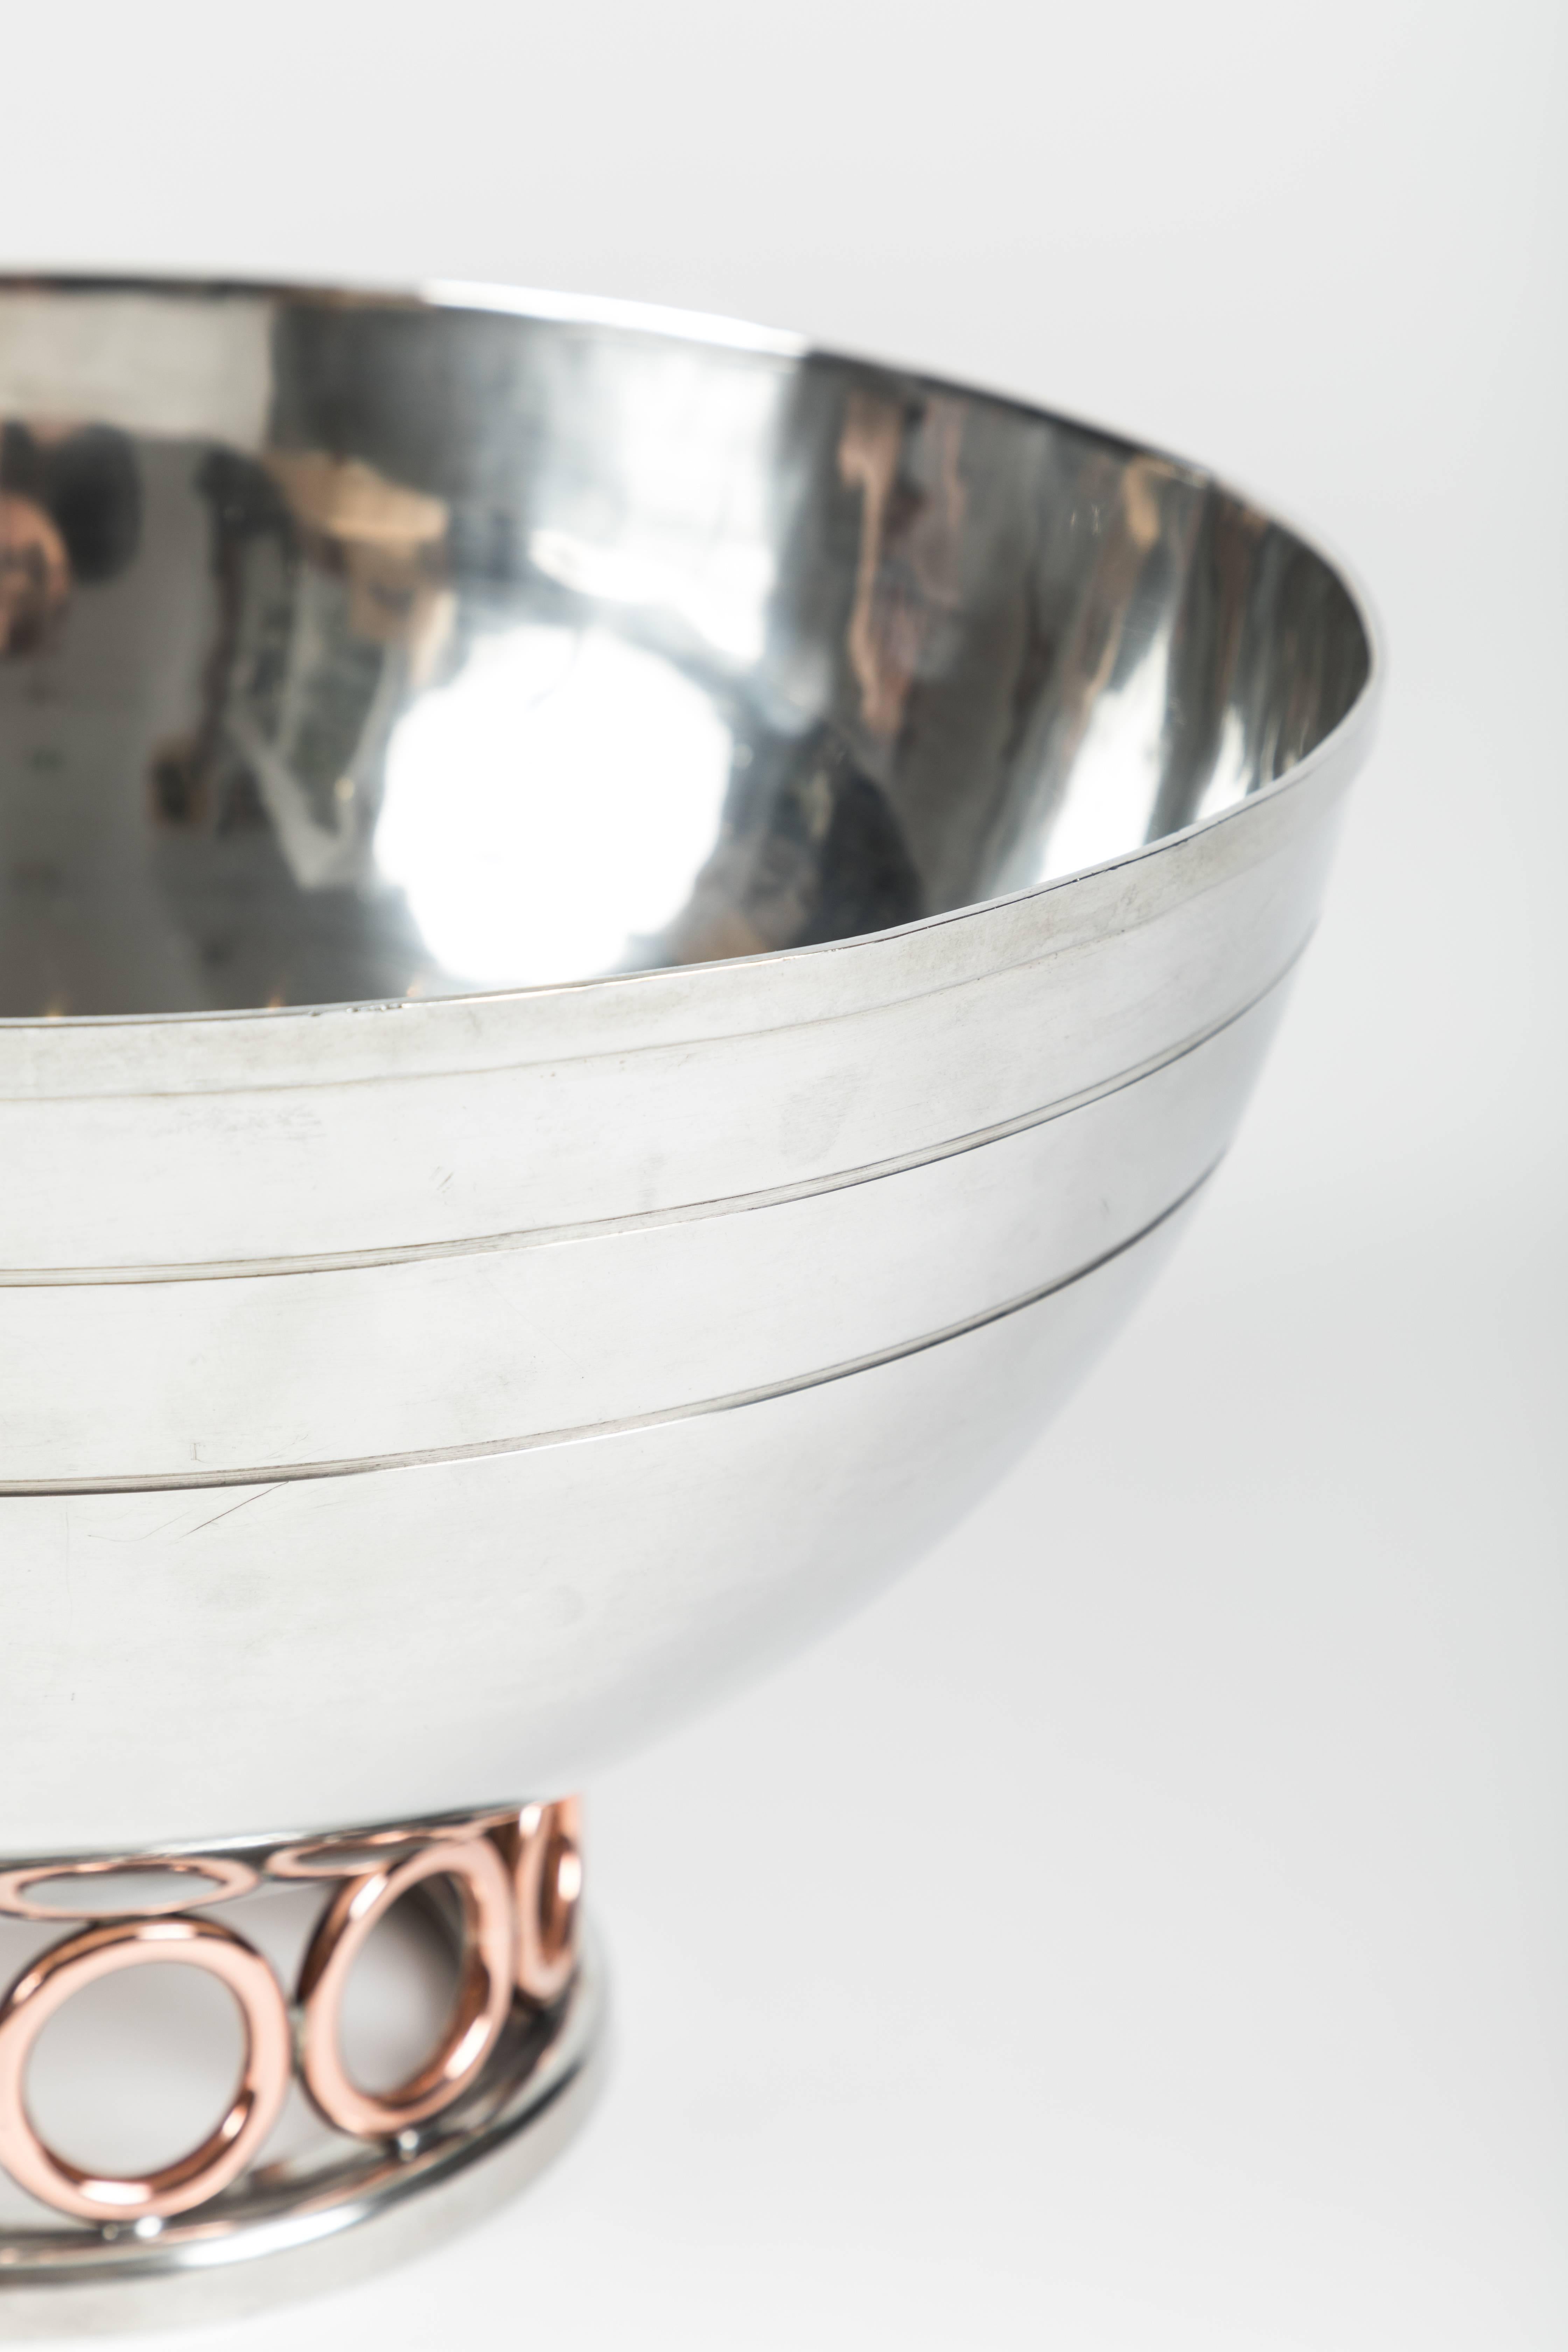 American Colonial Pewter Bowl with Copper Accents by Porter Blanchard